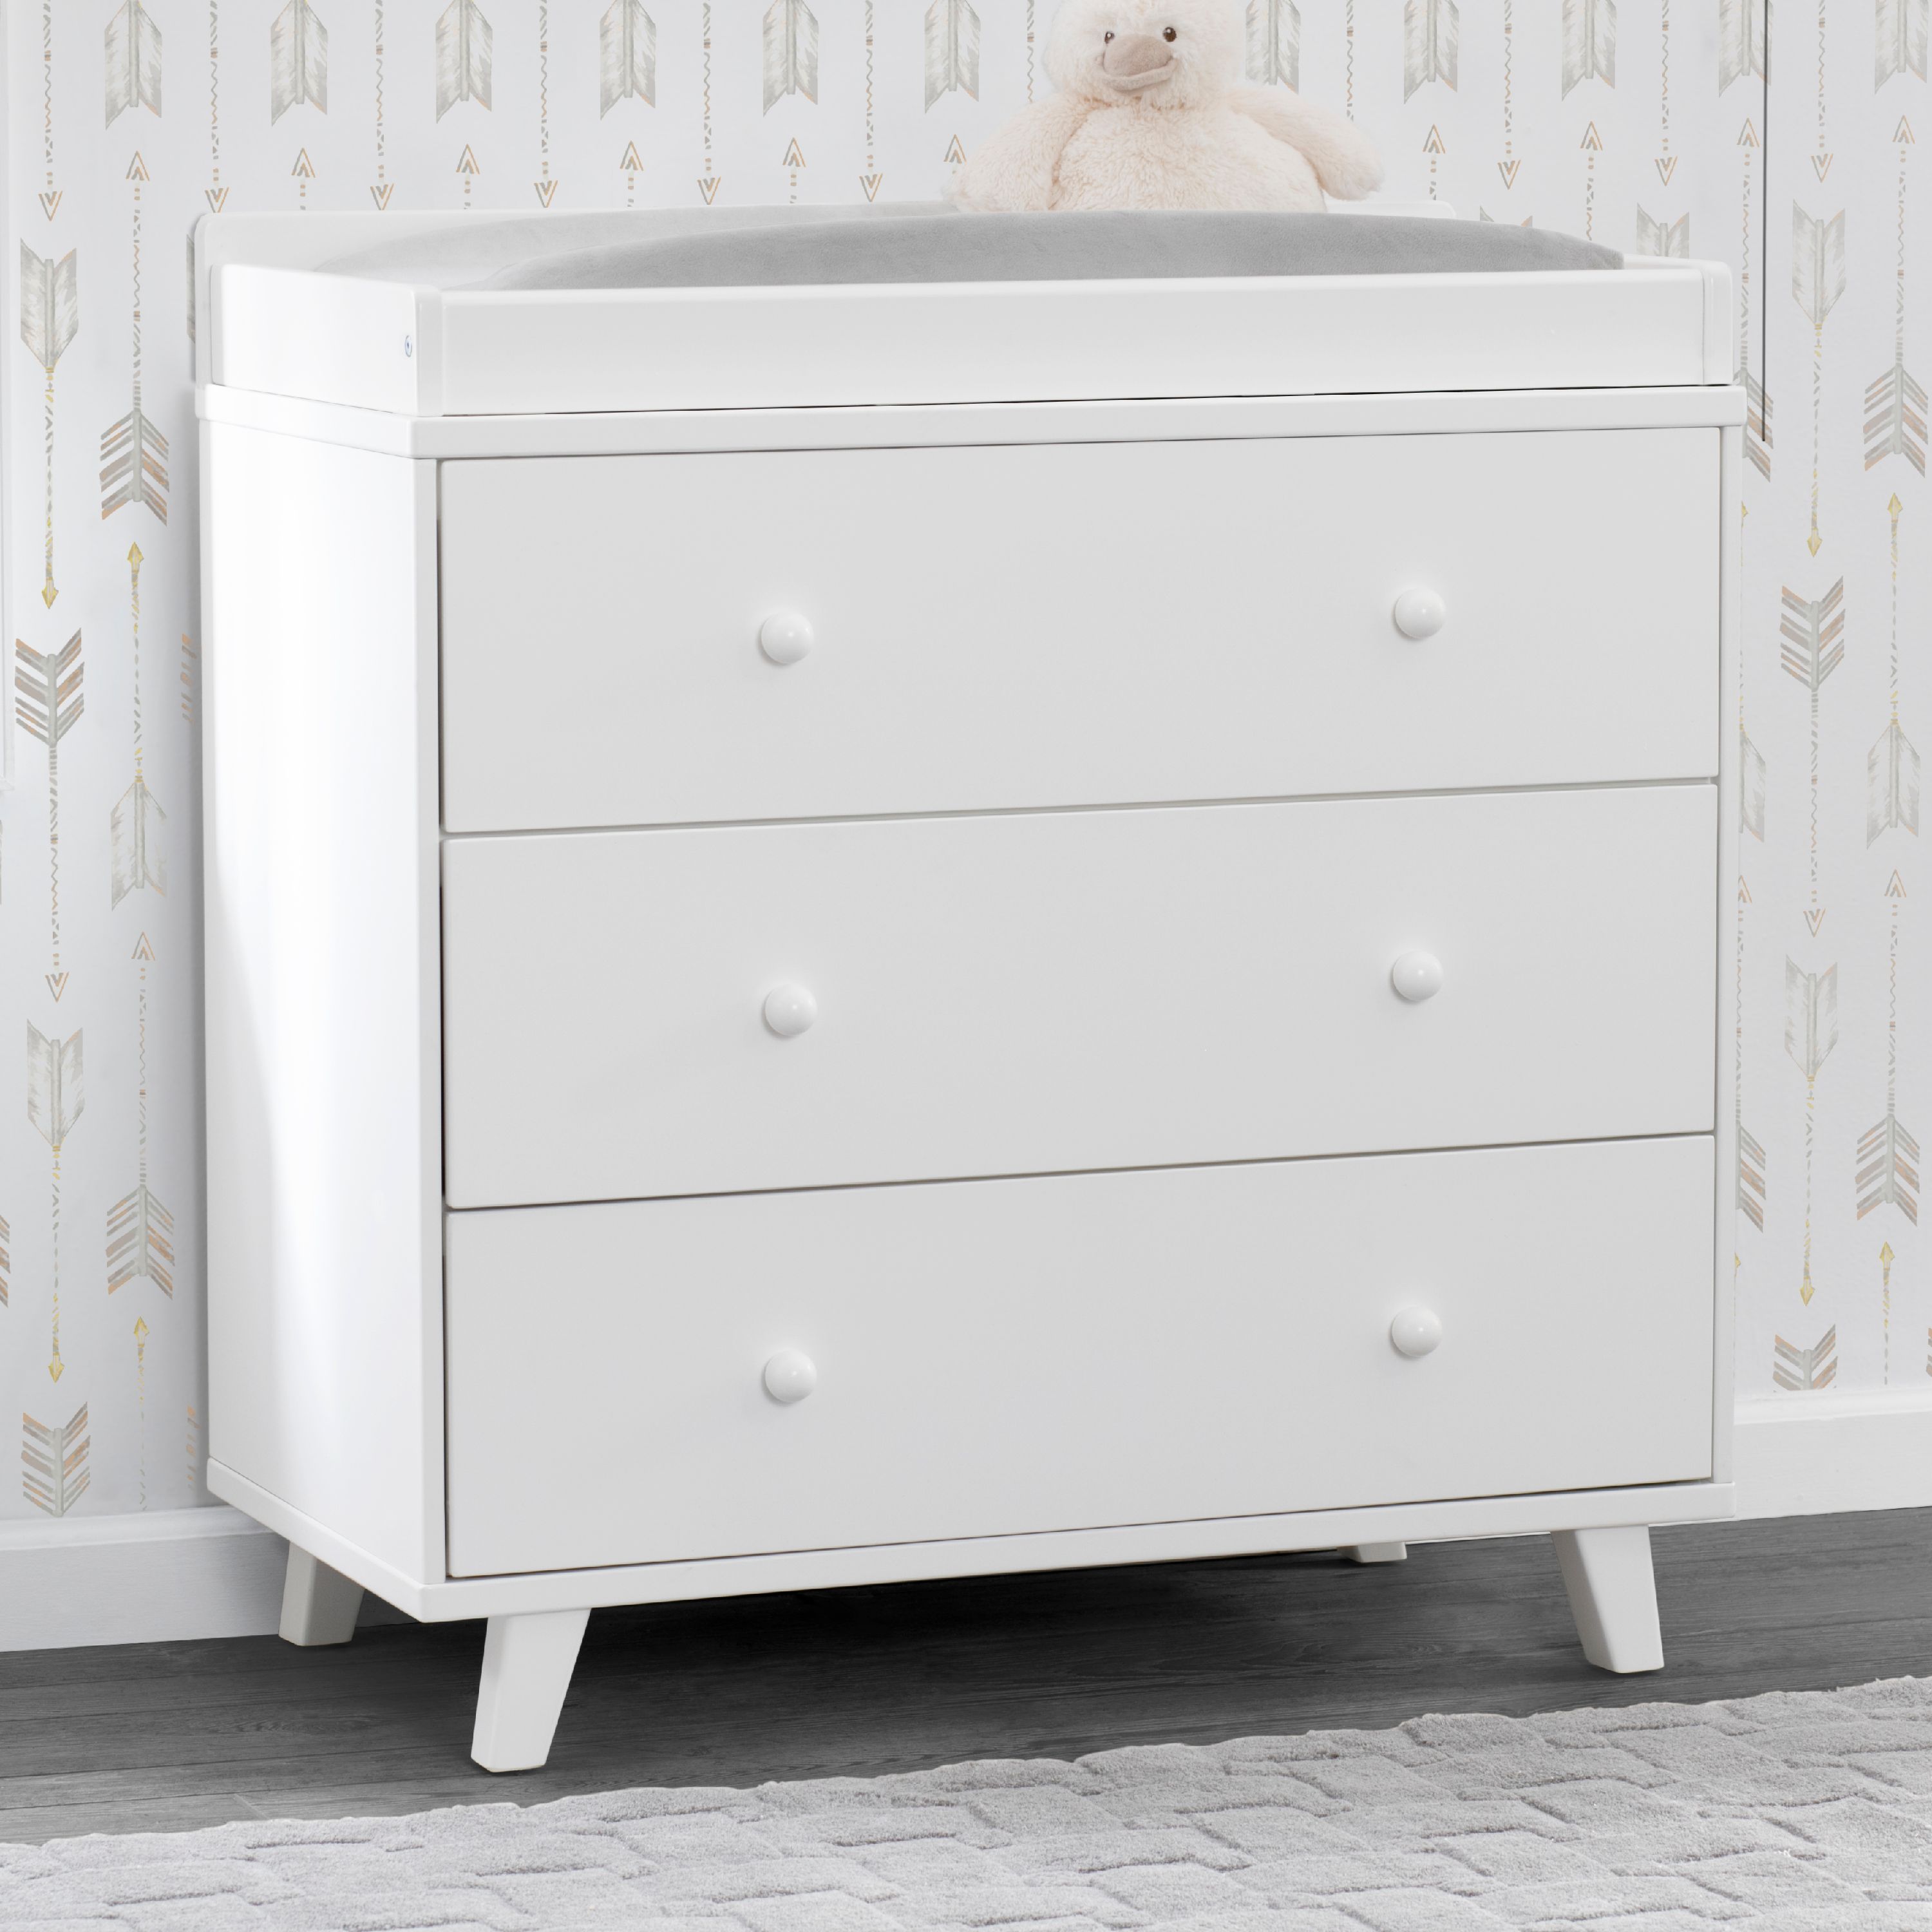 Delta Children Ava 3 Drawer Dresser with Changing Top, Greenguard Gold Certified, White - image 3 of 12